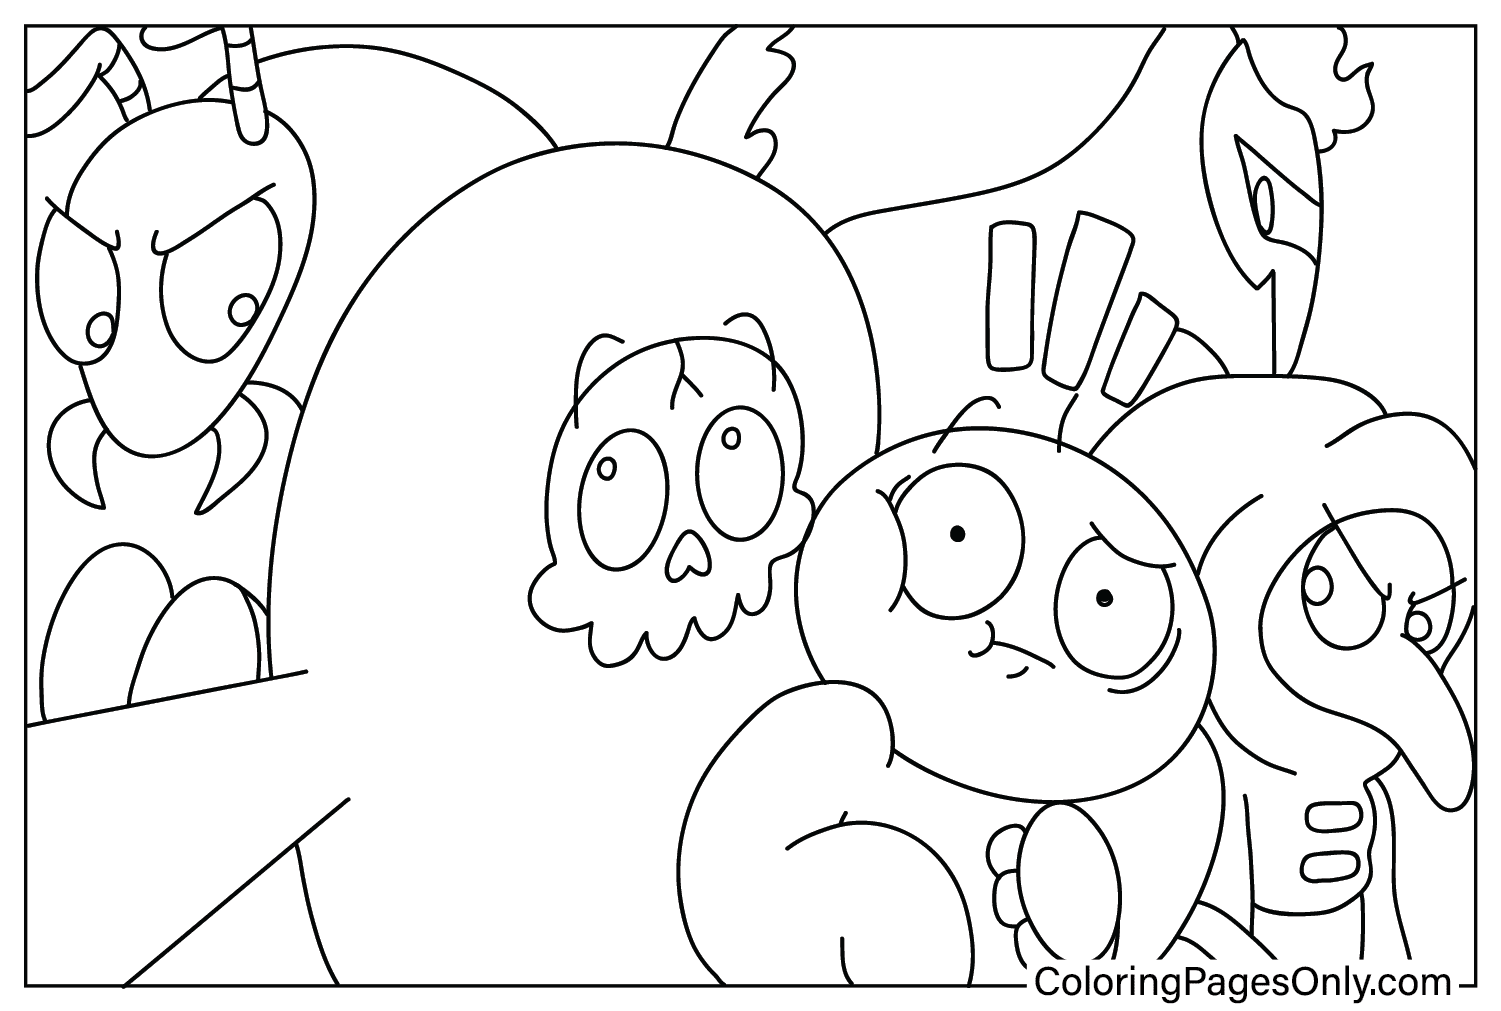 Coloring Sheet TheOdd1sOut from TheOdd1sOut